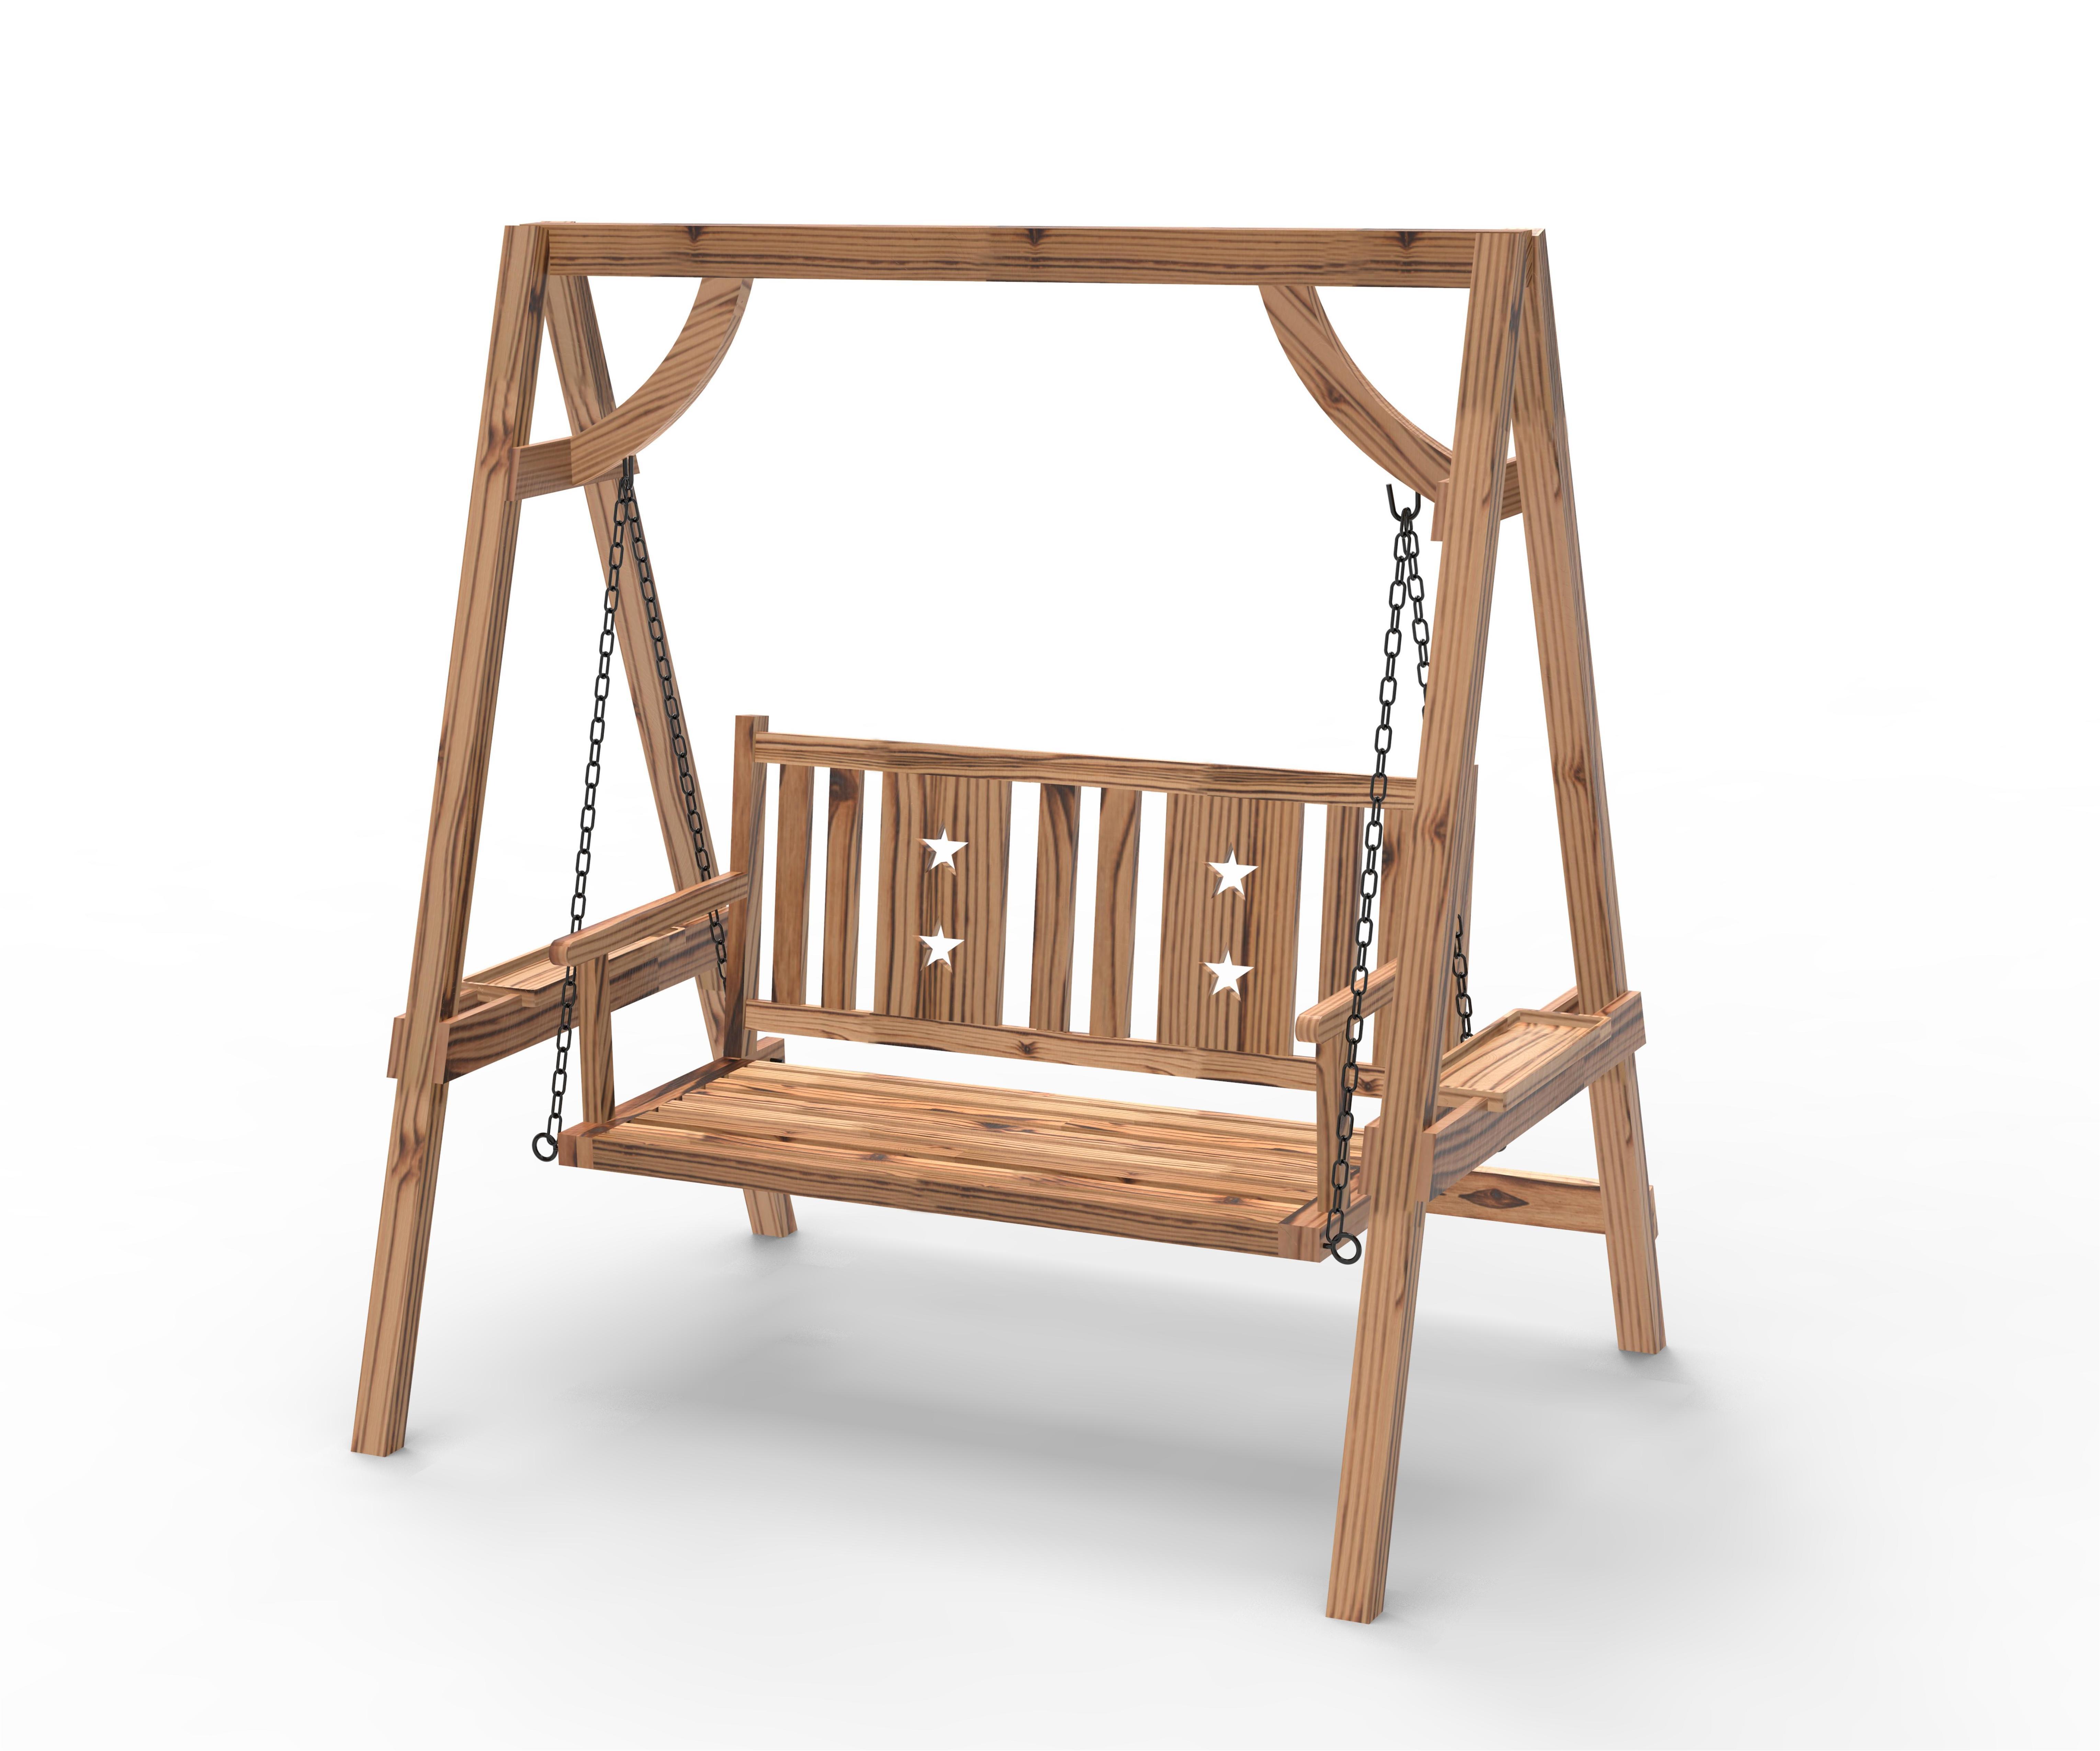 2-Person Outdoor Swing Porch Swing with Wooden Stand, Strong A-Frame Design, & Adjustable Water-Fighting Canopy, Rustic style swing